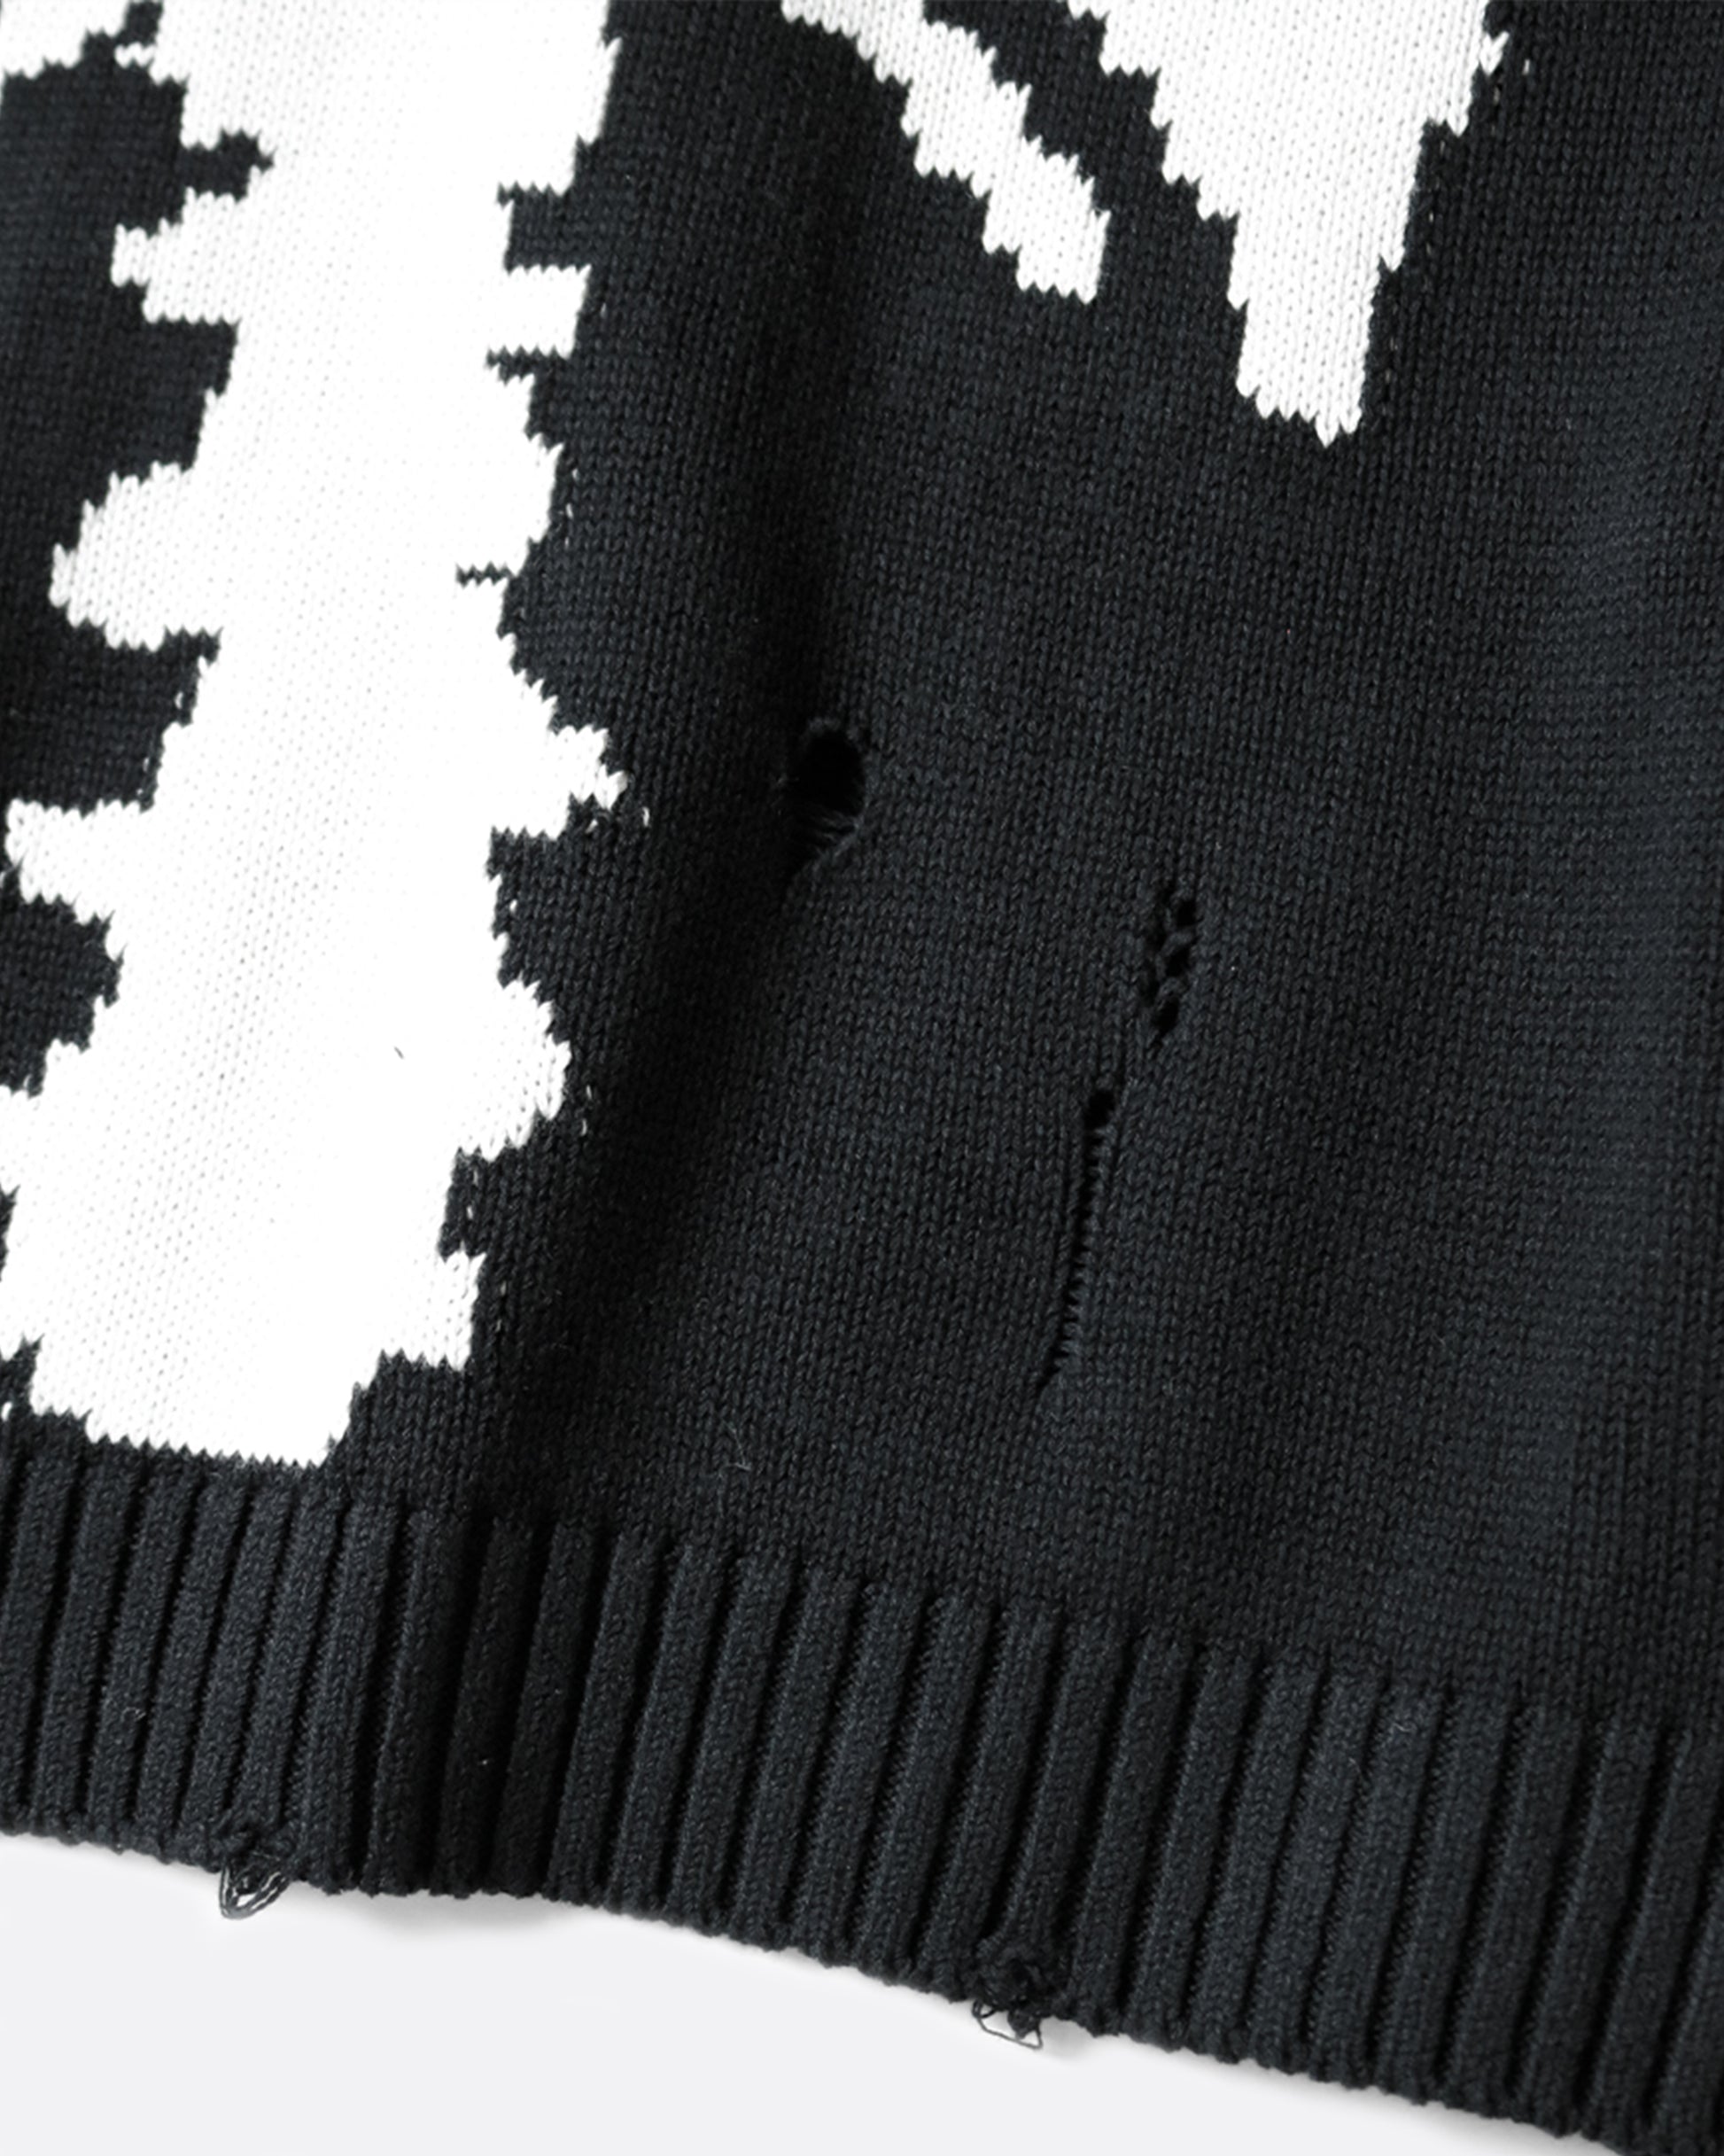 A distressed, black crewneck sweater with Kapital's beloved bone design on the back and sleeves.